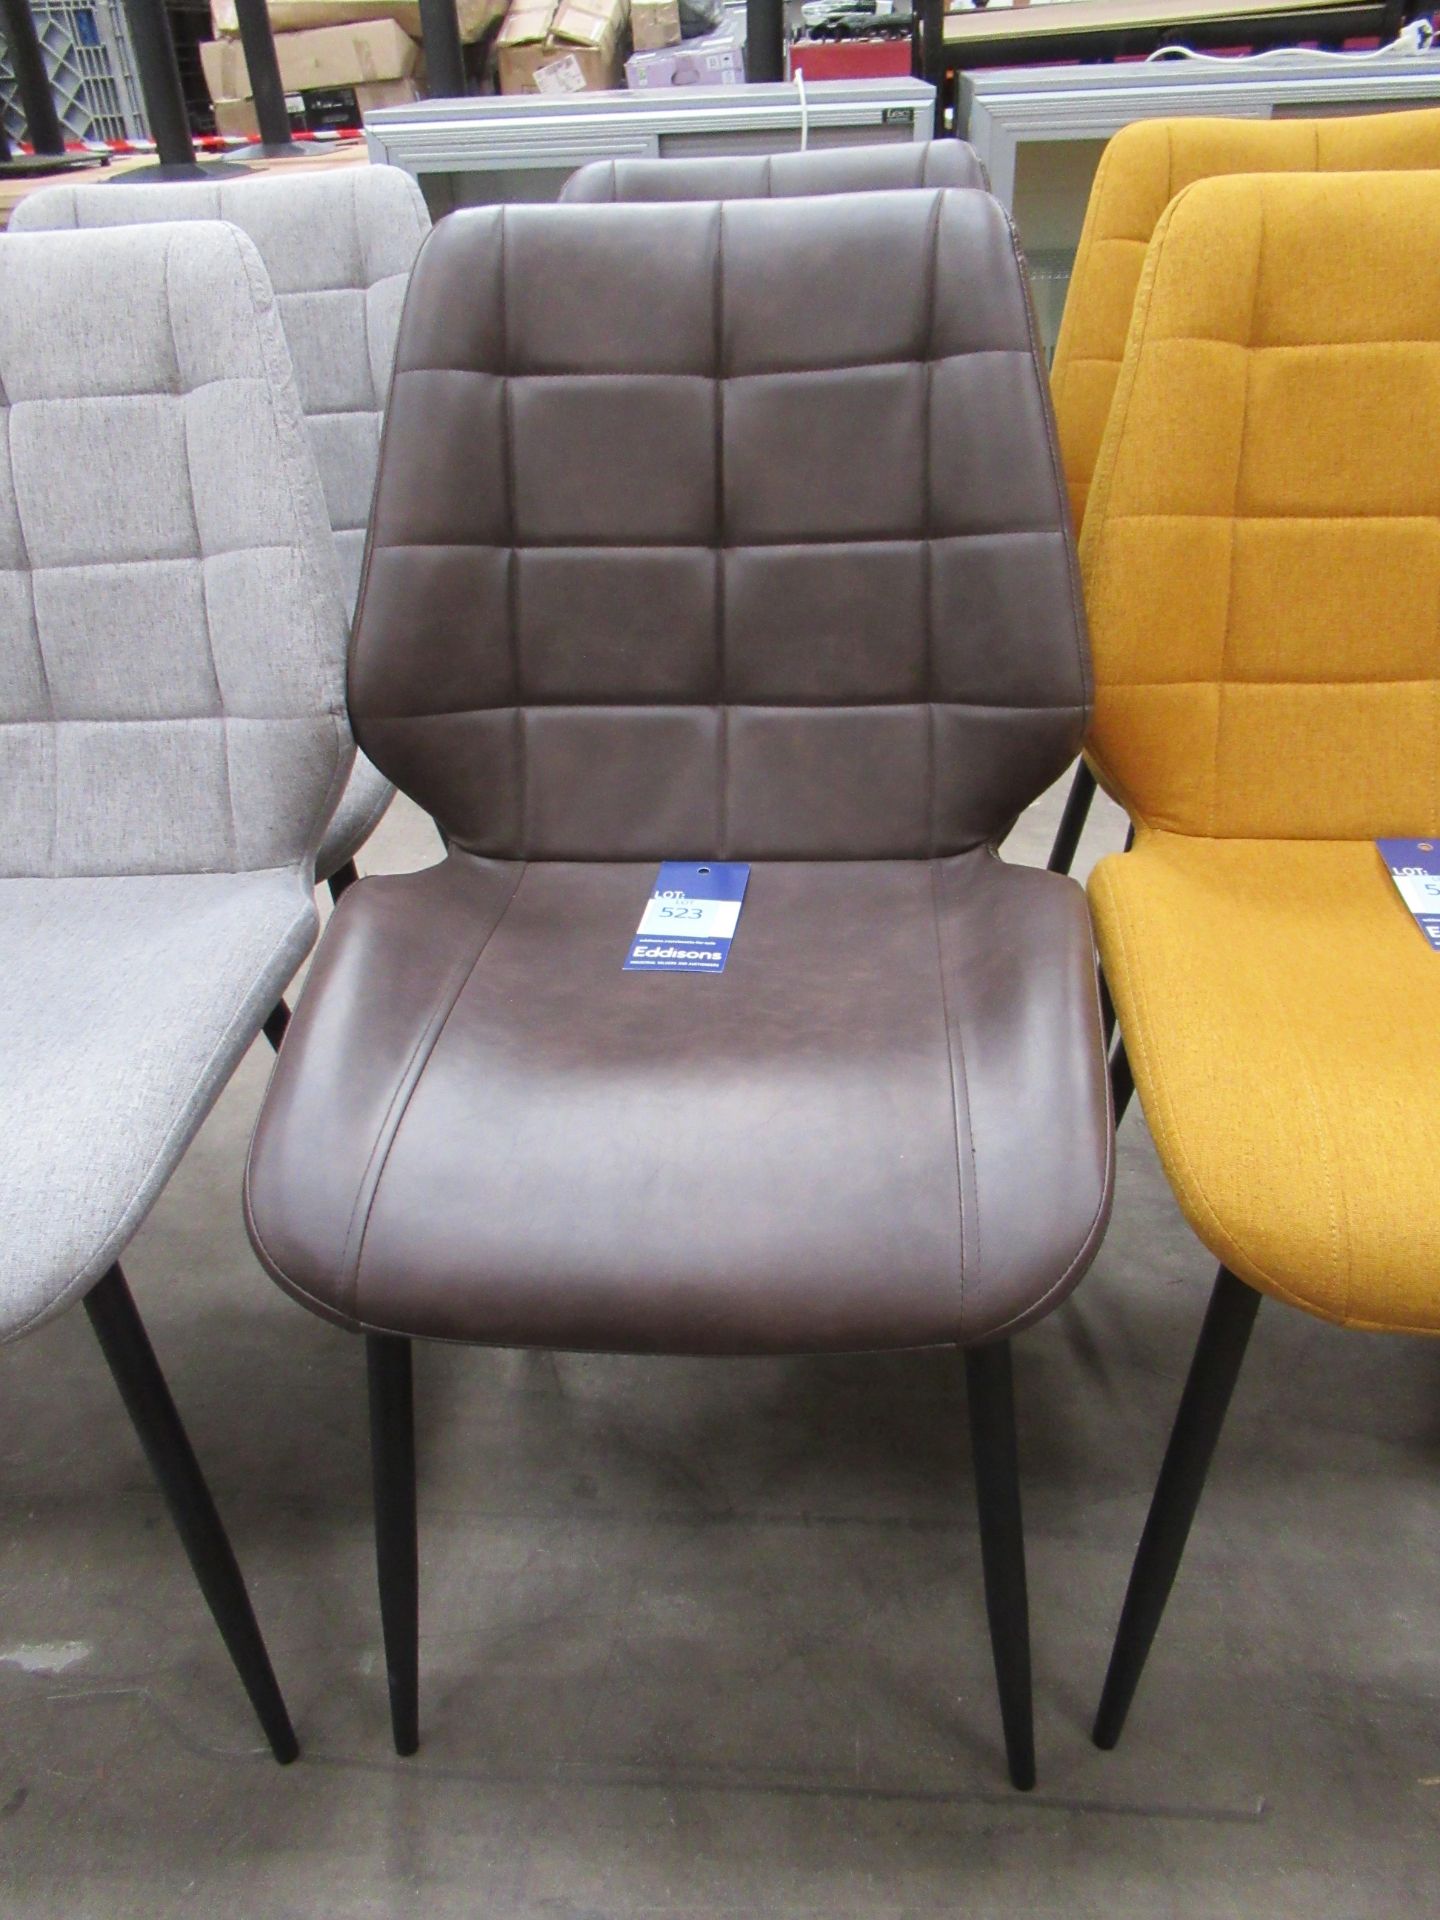 4x Chairs - 2x Grey, 2x Brown Leather - Image 3 of 3